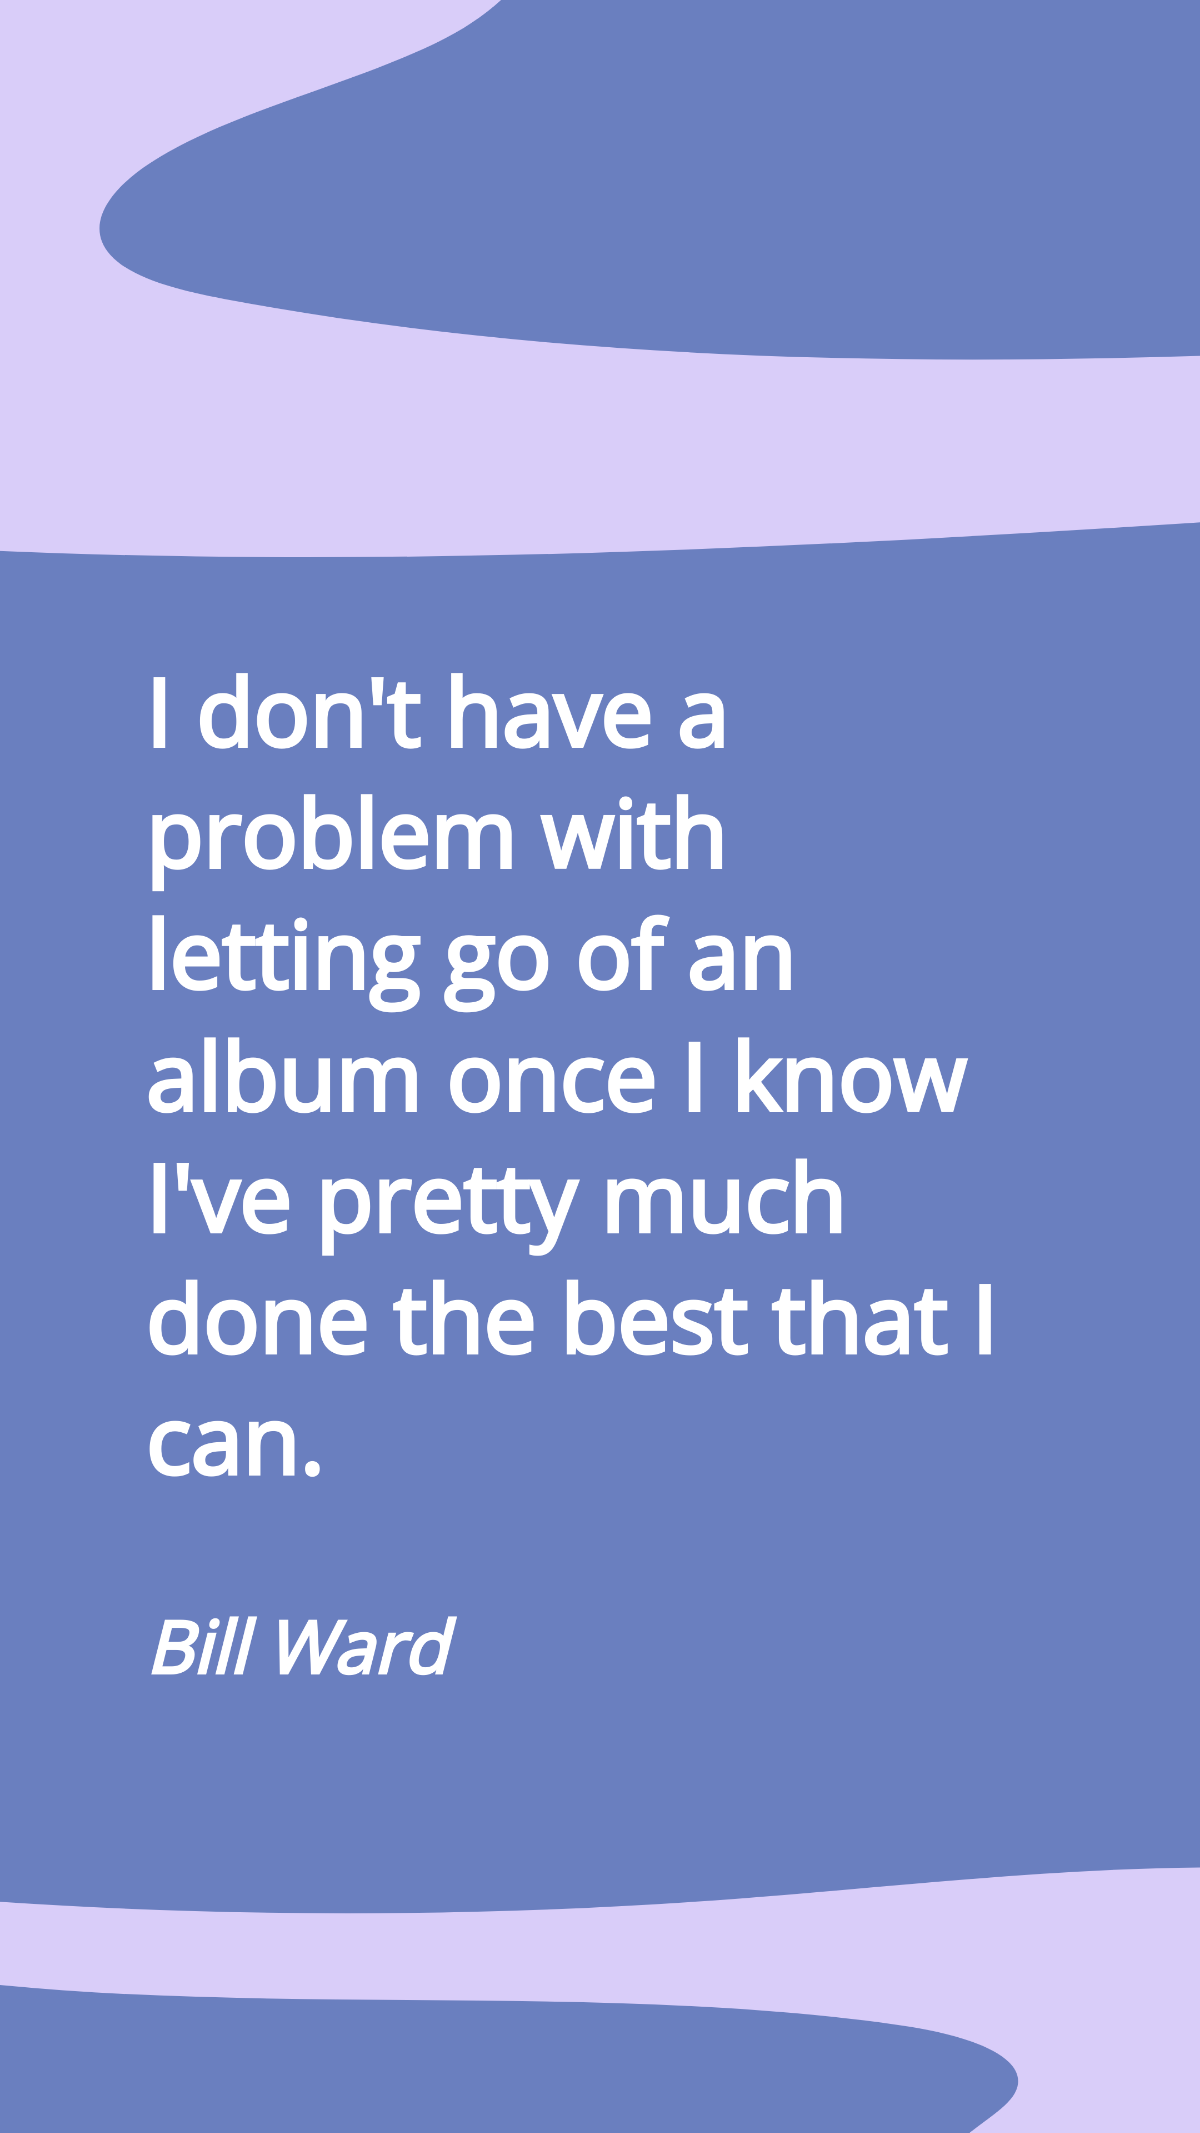 Bill Ward - I don't have a problem with letting go of an album once I know I've pretty much done the best that I can. Template